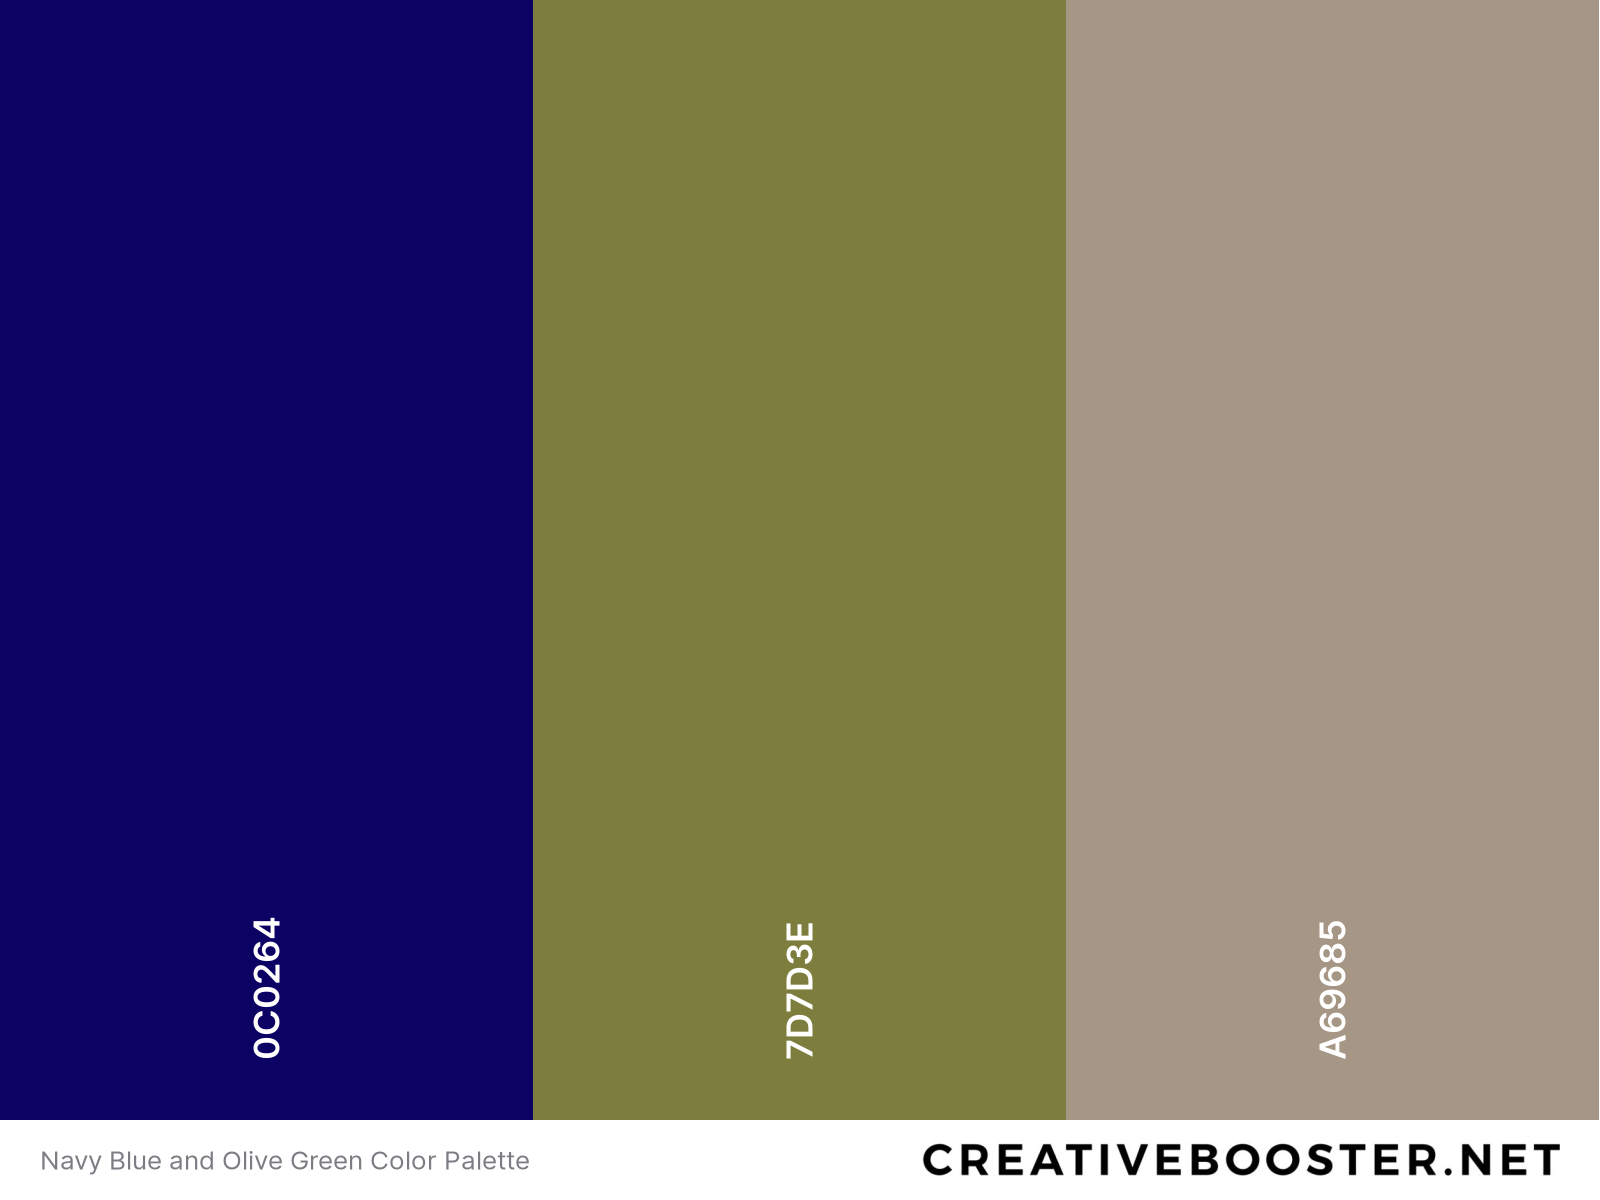 Navy Blue and Olive Green Color Palette